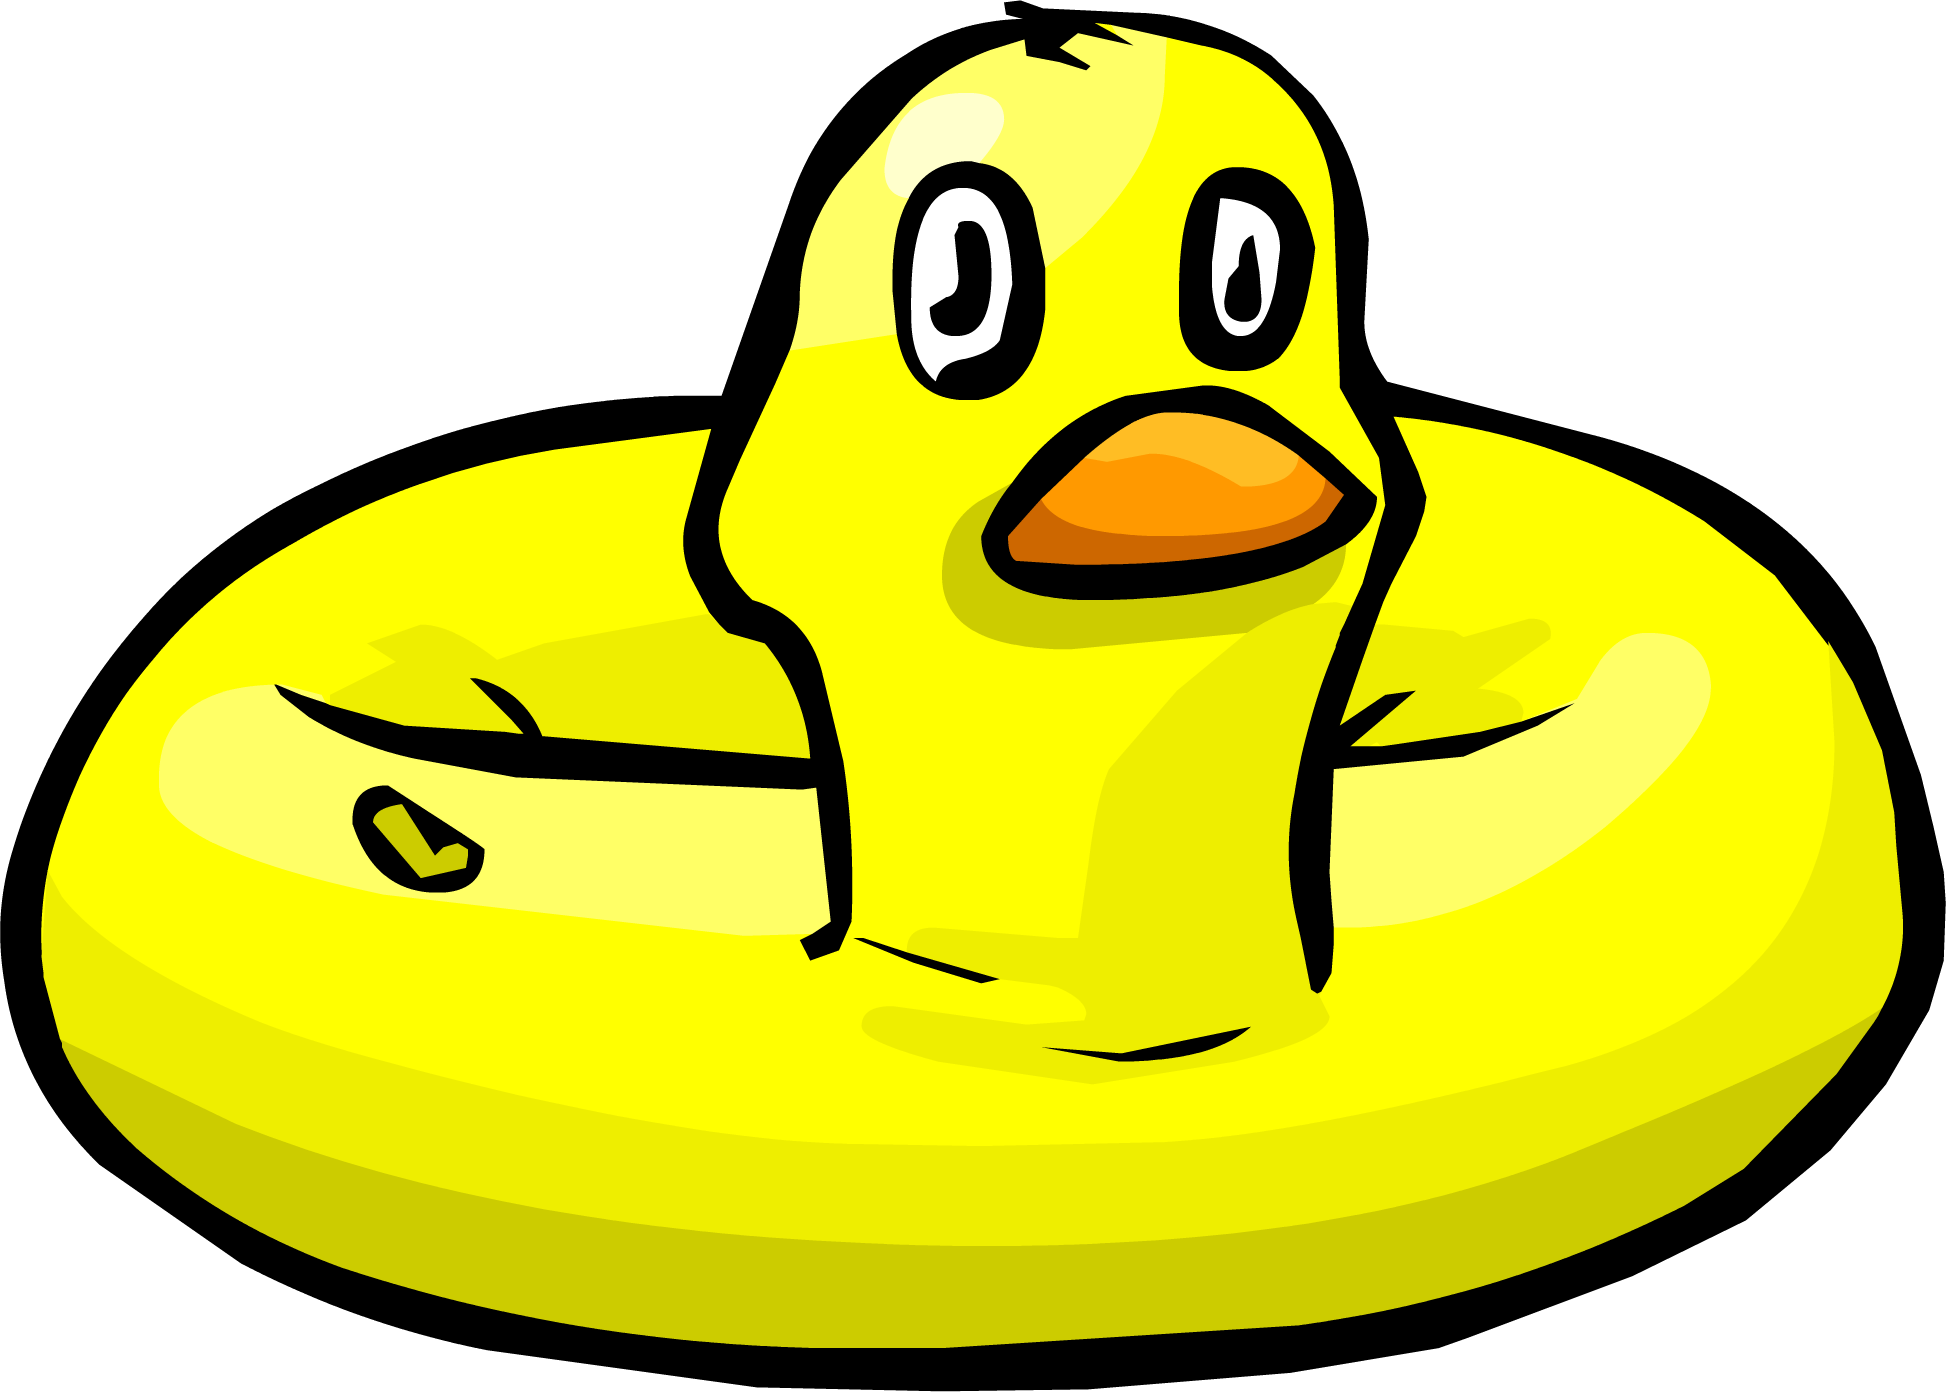 16 years ago today, the first ever Summer Party started. Penguins could  obtain the Blue Lei, Yellow Inflatable Duck, Orange Water Wings and Red  Whistle. As well as waddle in the new